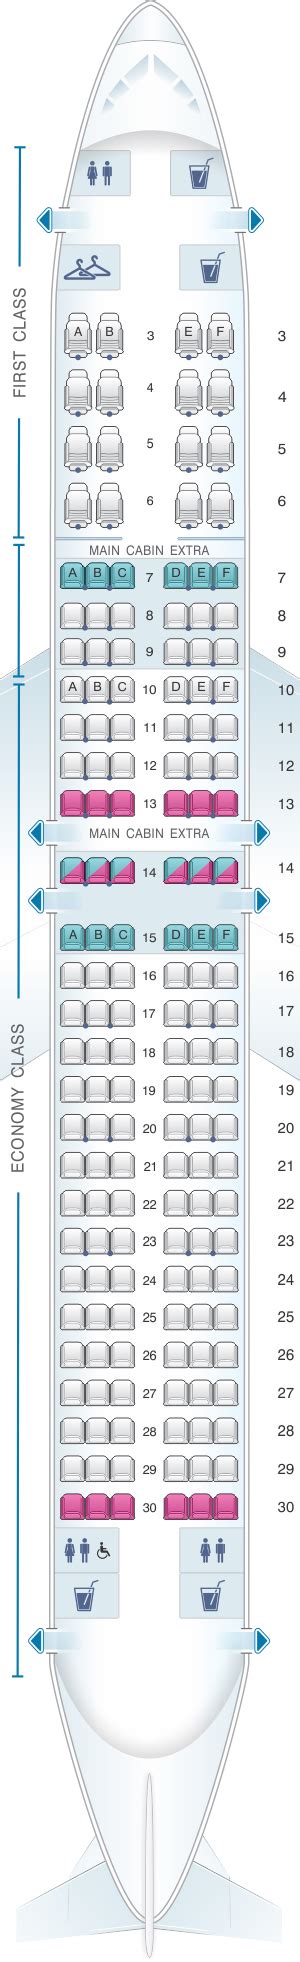 Main Cabin Extra on the American Airlines Boeing 757 offer